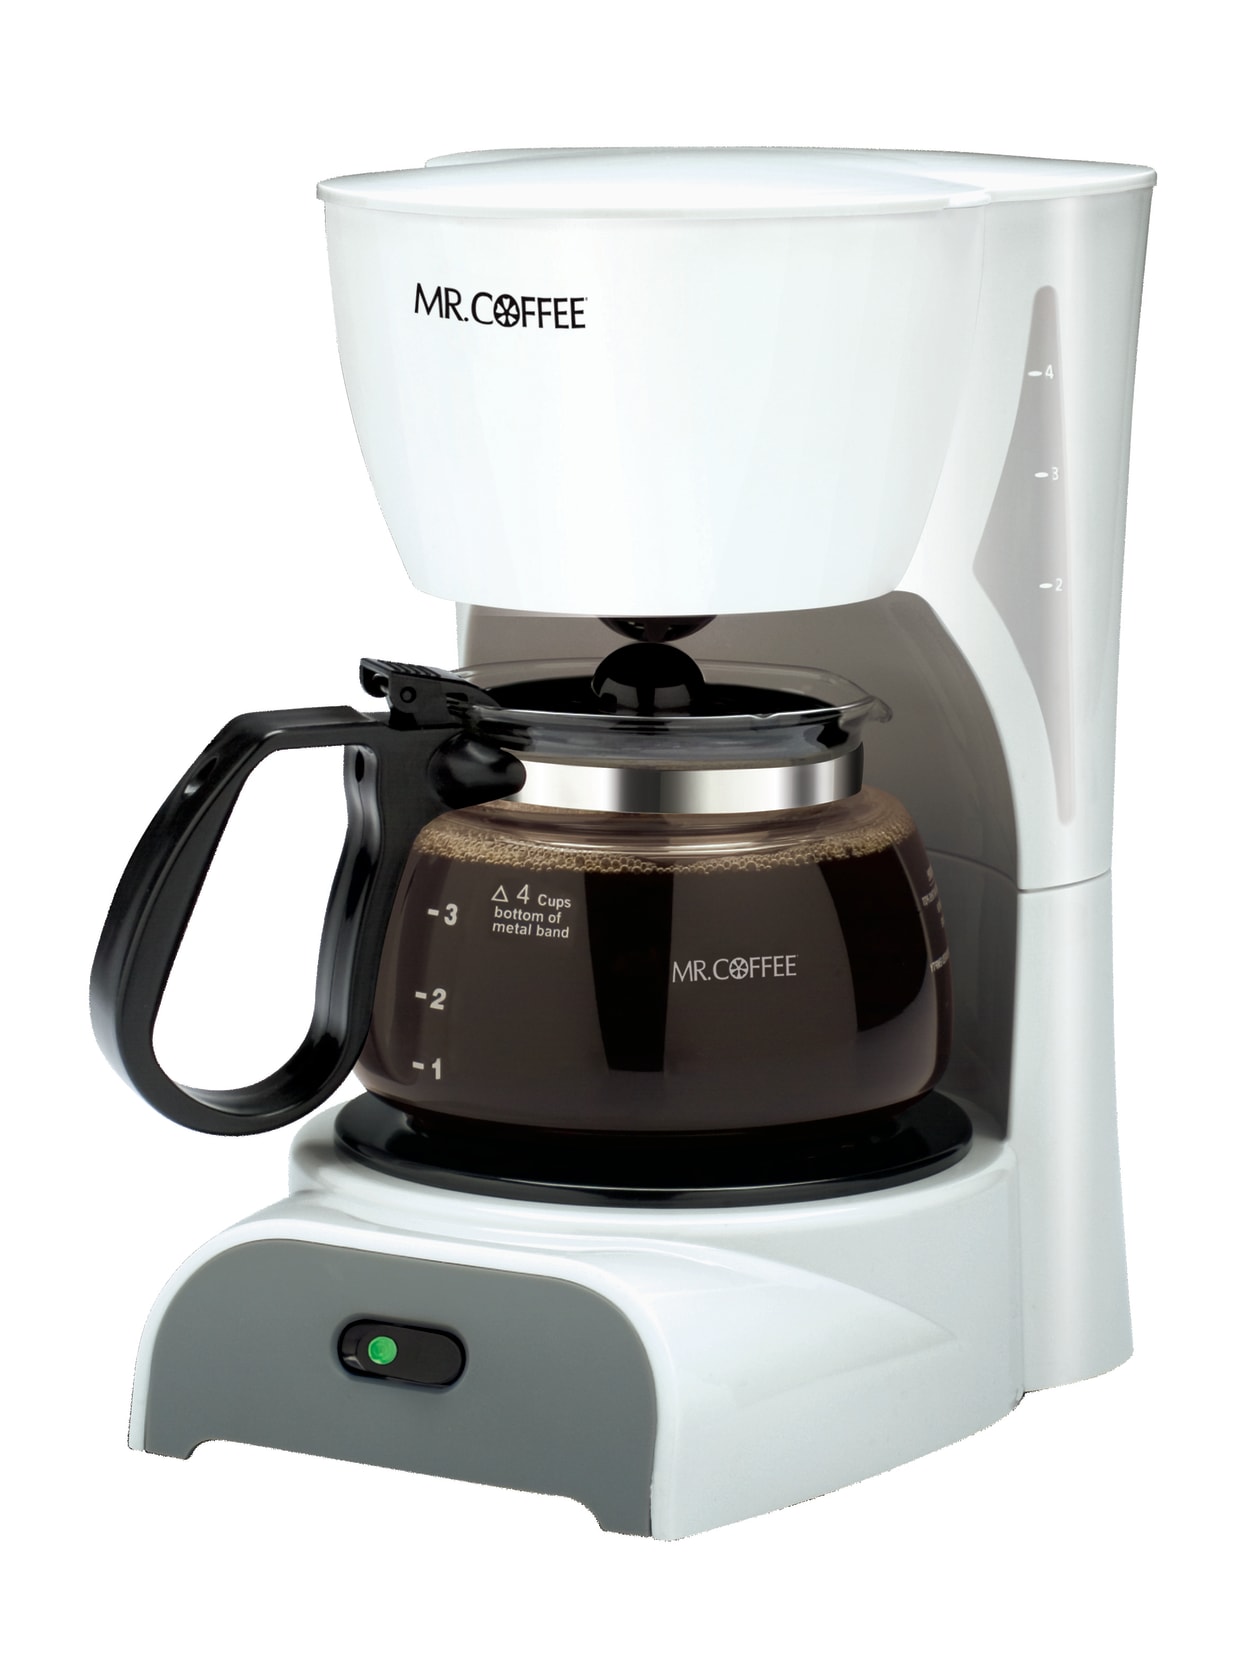 4 cup coffee maker